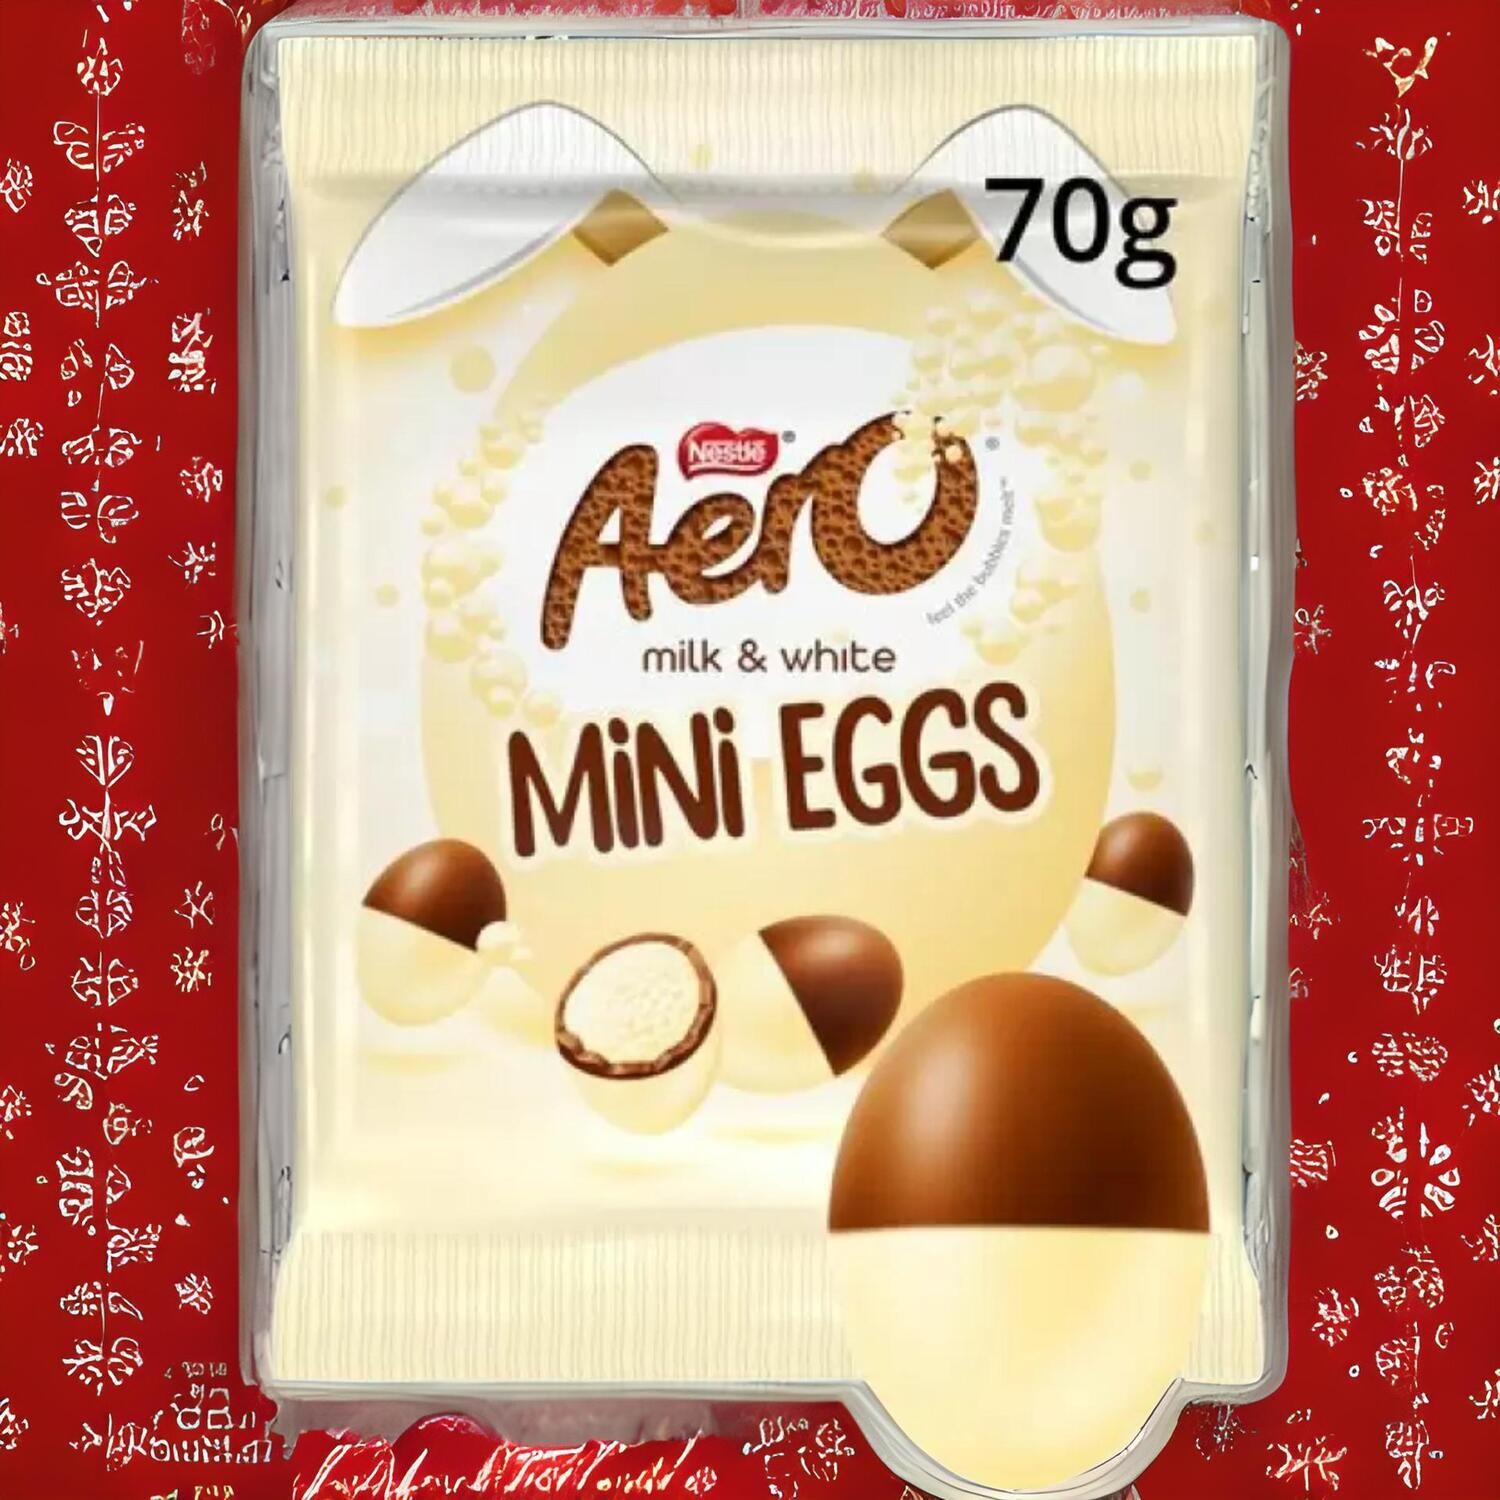 Nestle Aero Milk & White Mini Eggs 70g | Easter Special Treat Chocolate | melt-proof Packing | Free Delivery